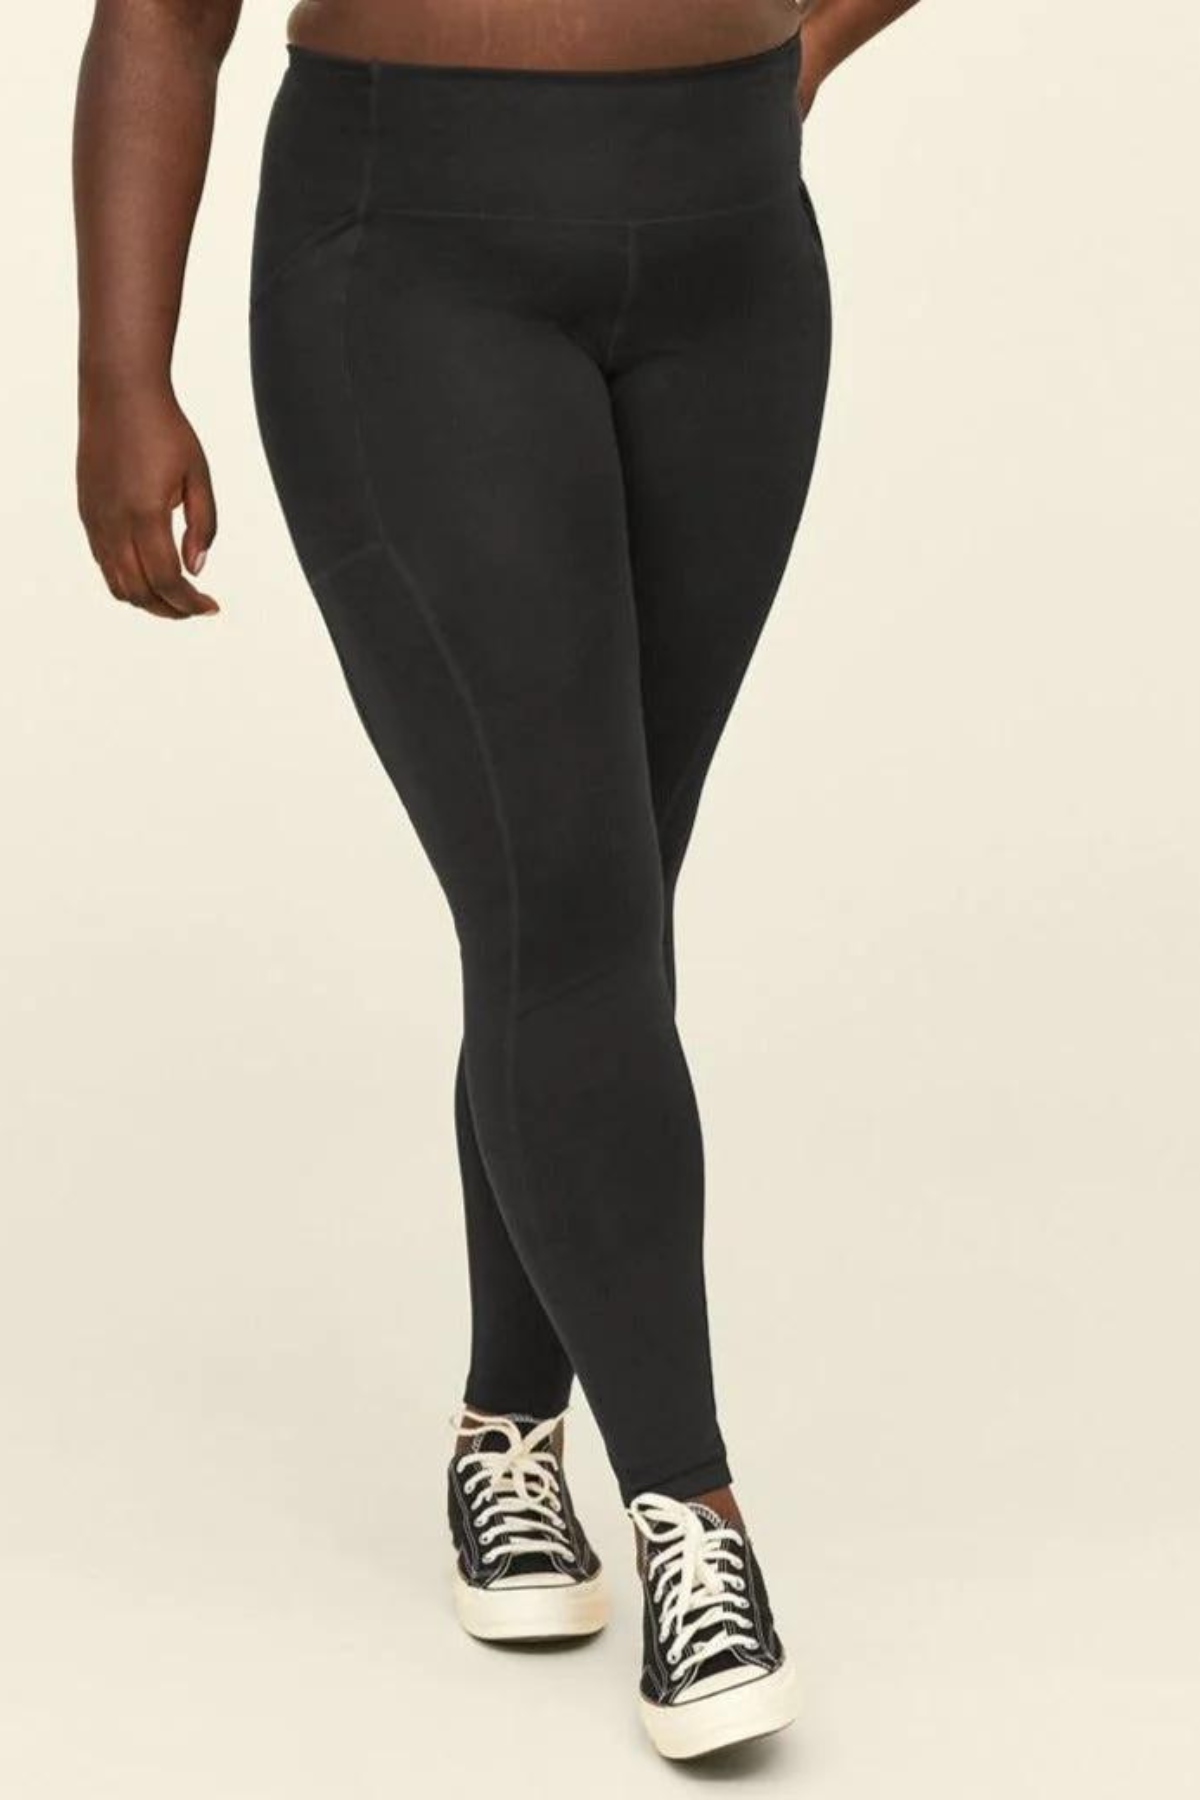 Girlfriend Collective High Rise Compression Navy Blue 7/8 Athletic Leggings  XS - $45 - From Tallulahs